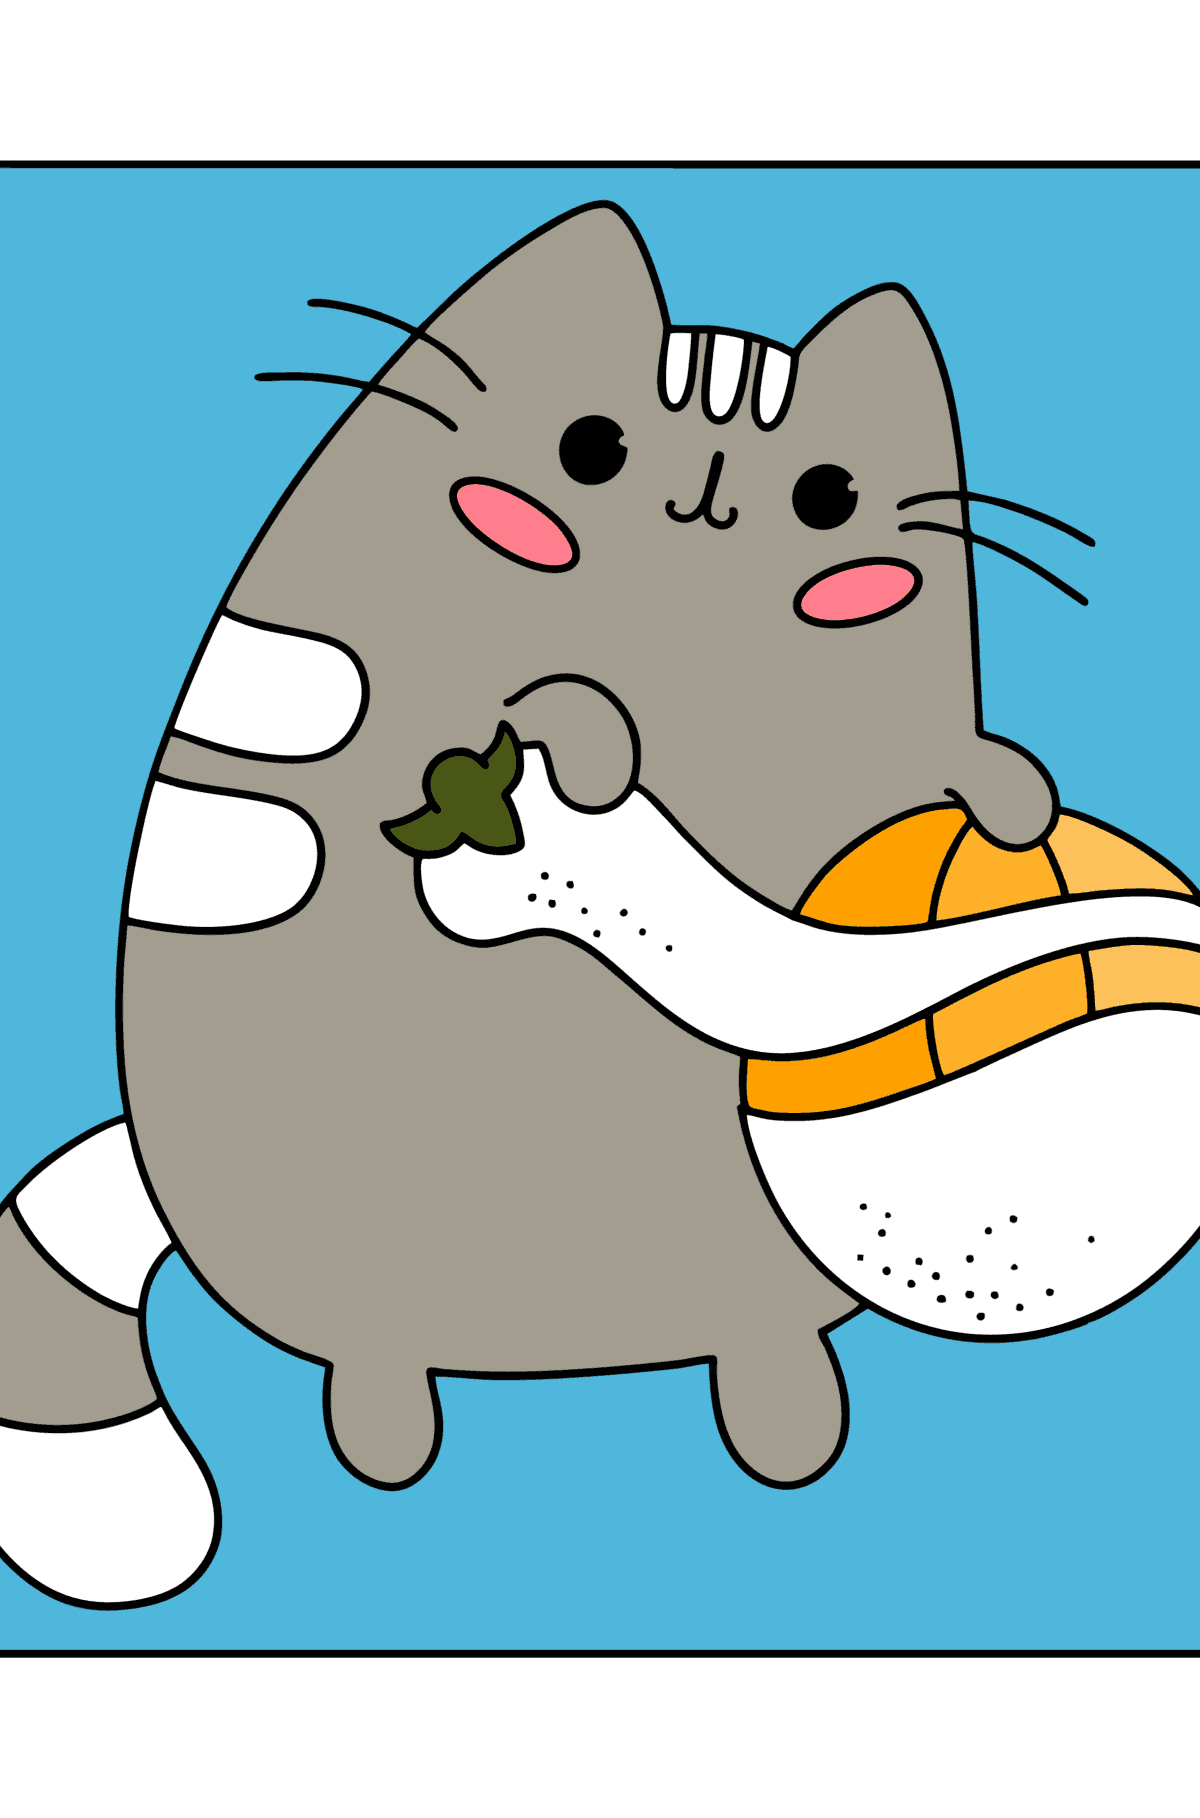 Cute Pusheen сoloring page - Coloring Pages for Kids